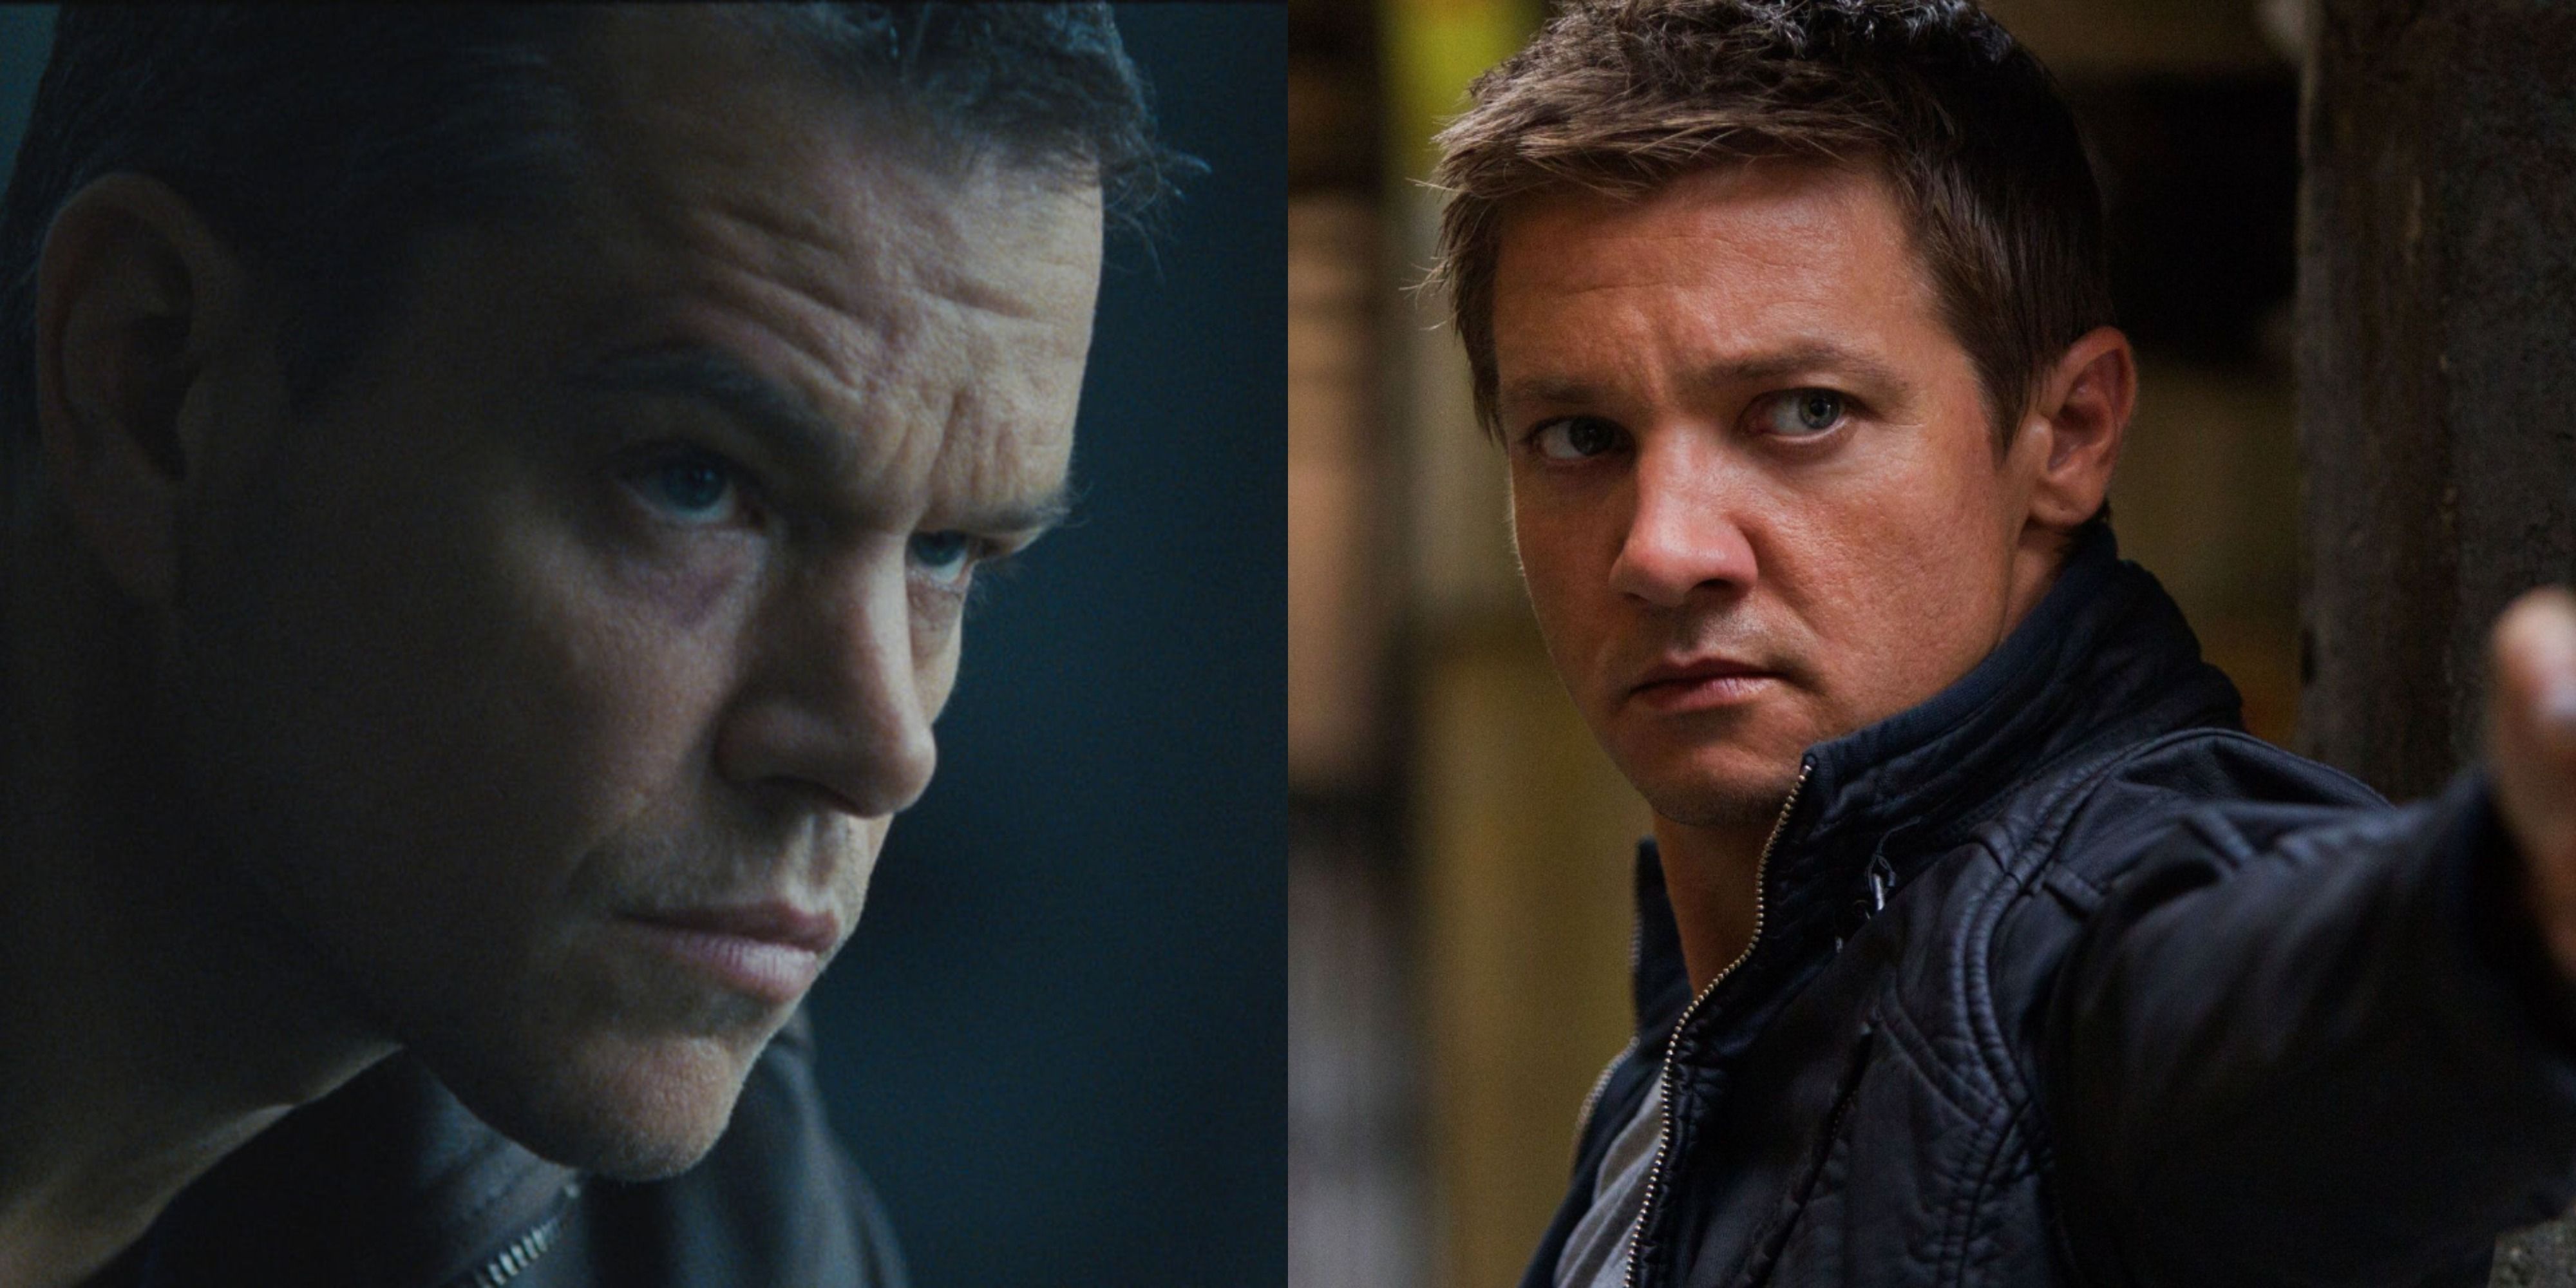 Featured image Matt Damon in Jason Bourne and Jeremy Renner in The Bourne Legacy